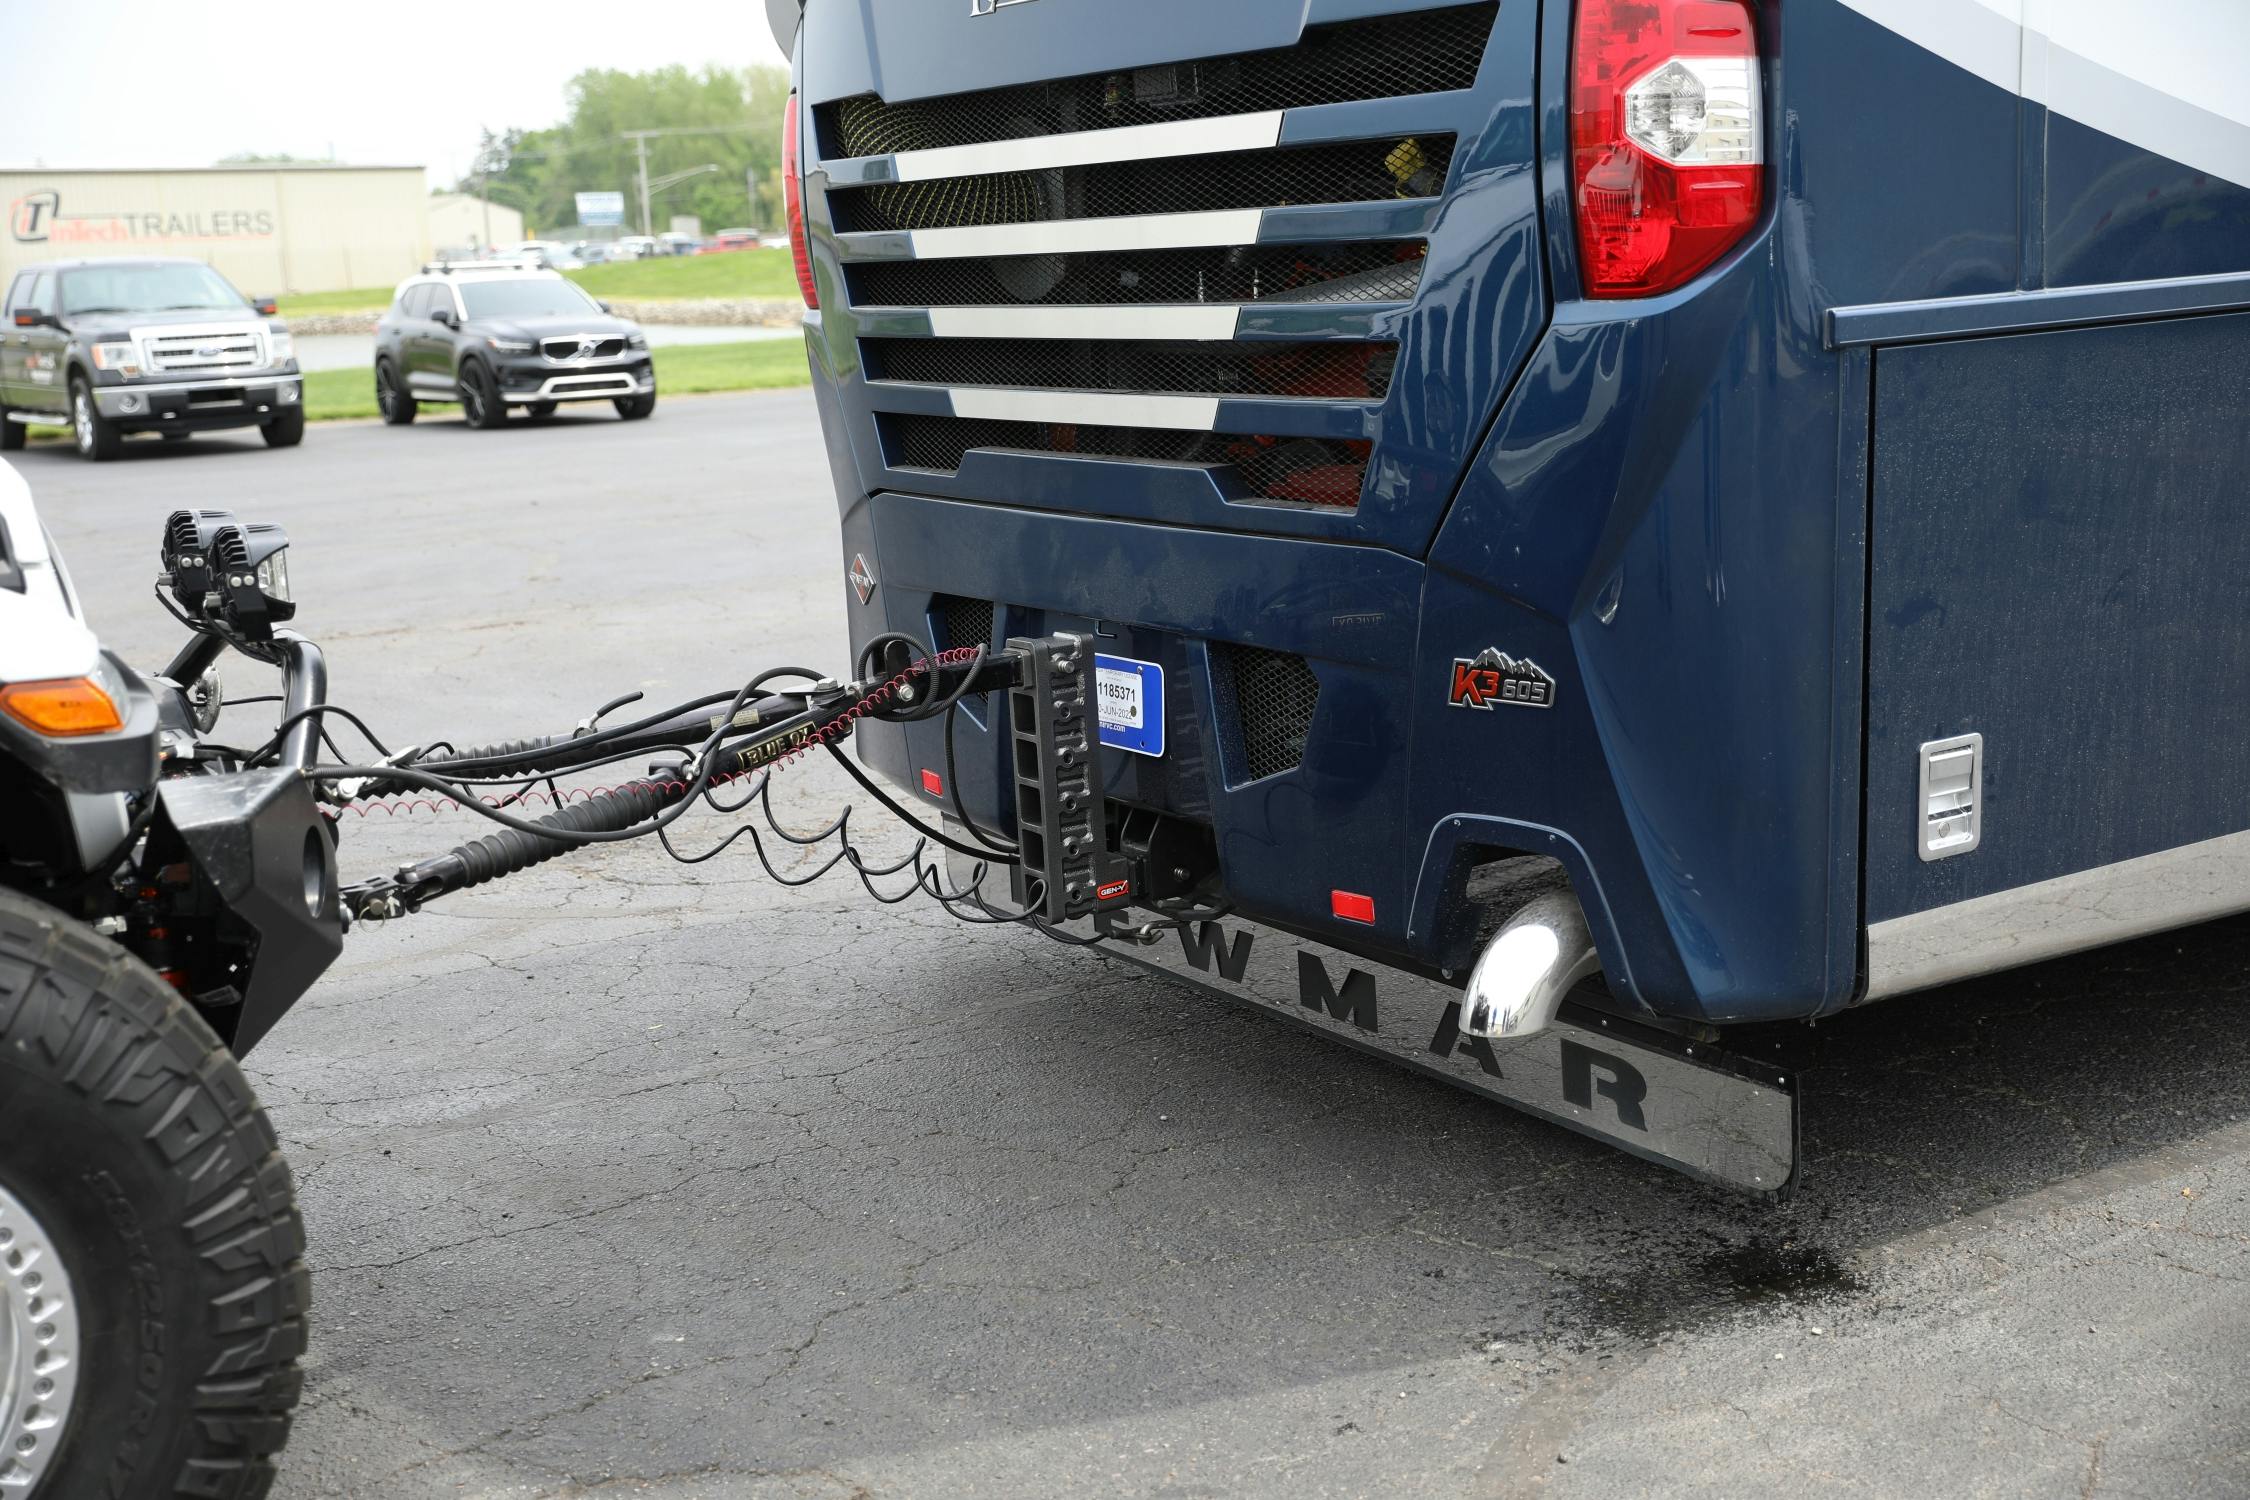 GEN-Y Hitch GH-627 Mega-Duty 2.5in Shank 18in Drop 3K TW 21K Hitch and GH-061 and GH-062 and GH-0101